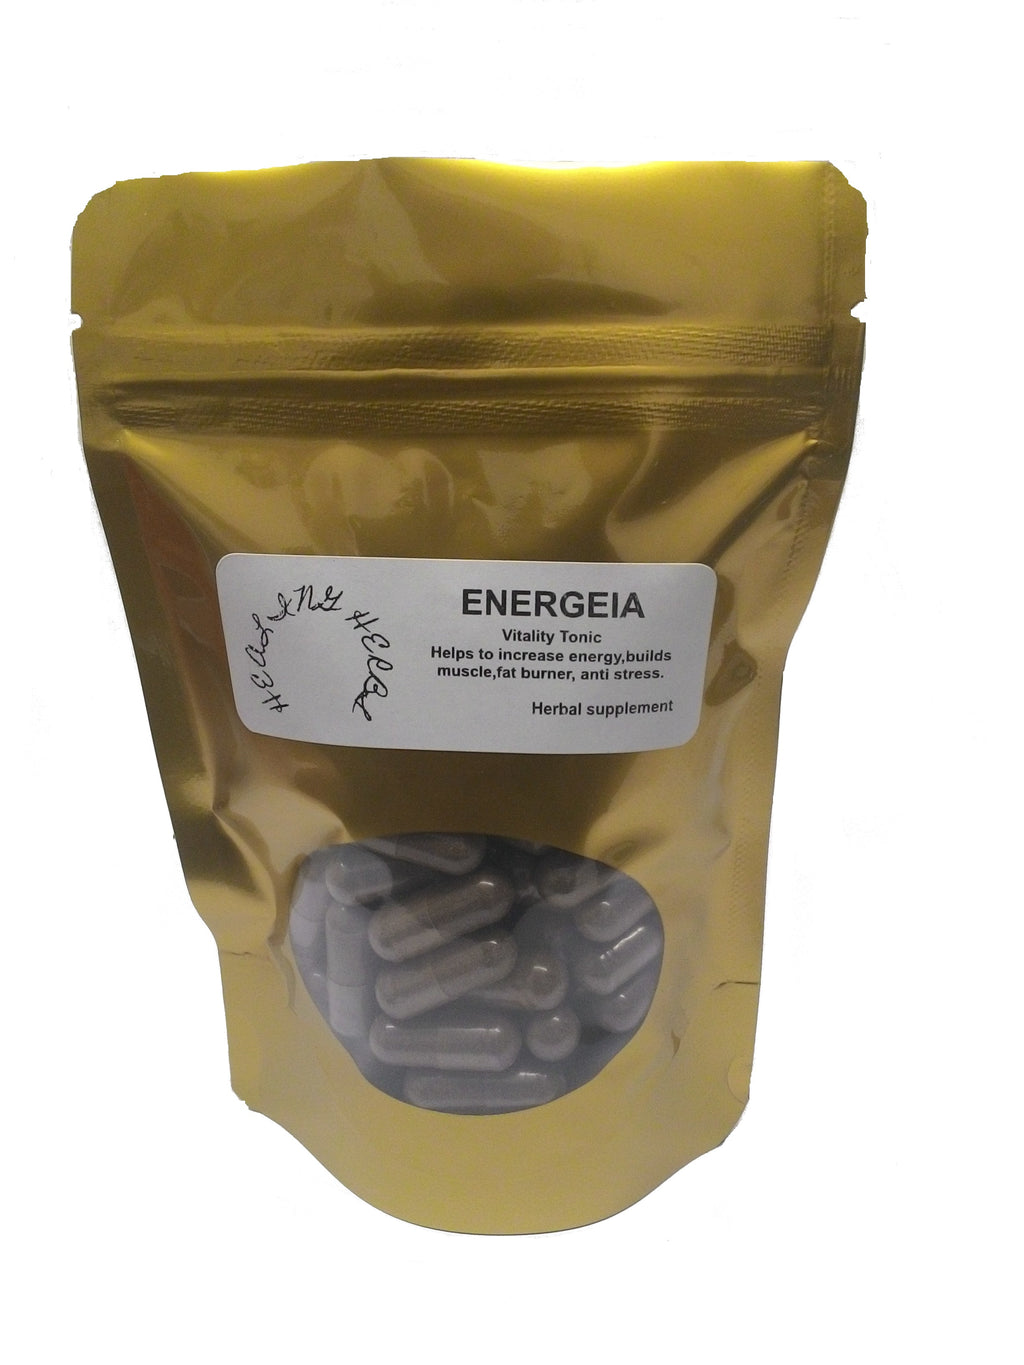 this herbal combination "ENERGIA" helps to reduce stress,built muscles and increase endurance